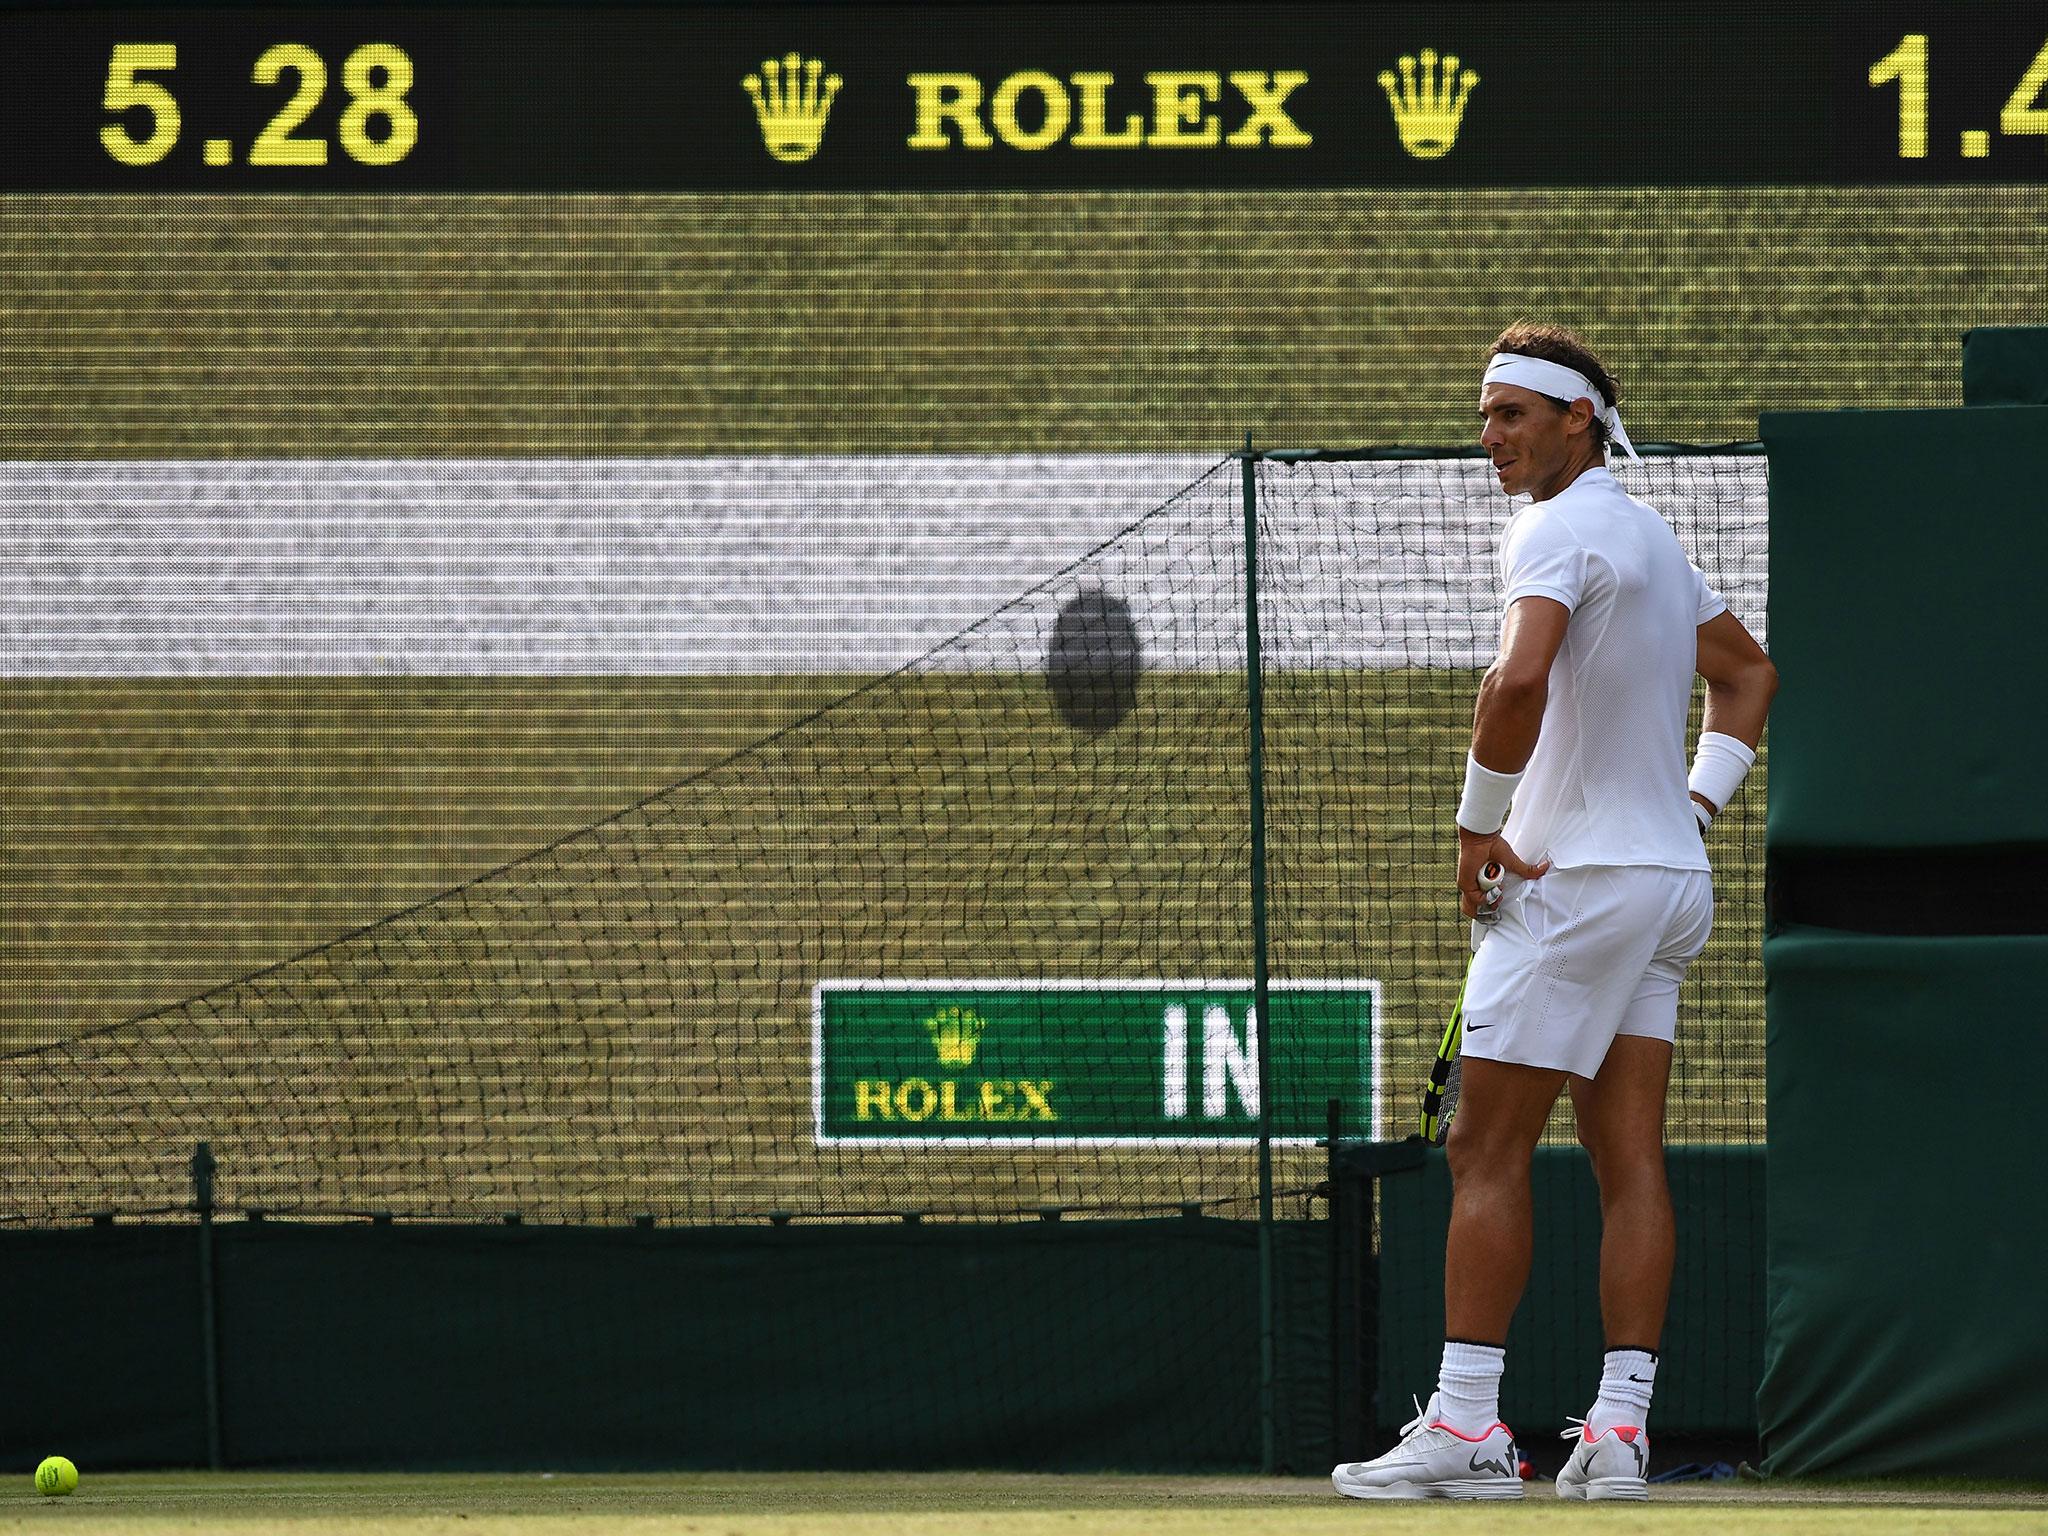 Rafael Nadal reacts after a Hawk-Eye decision goes against him at Wimbledon